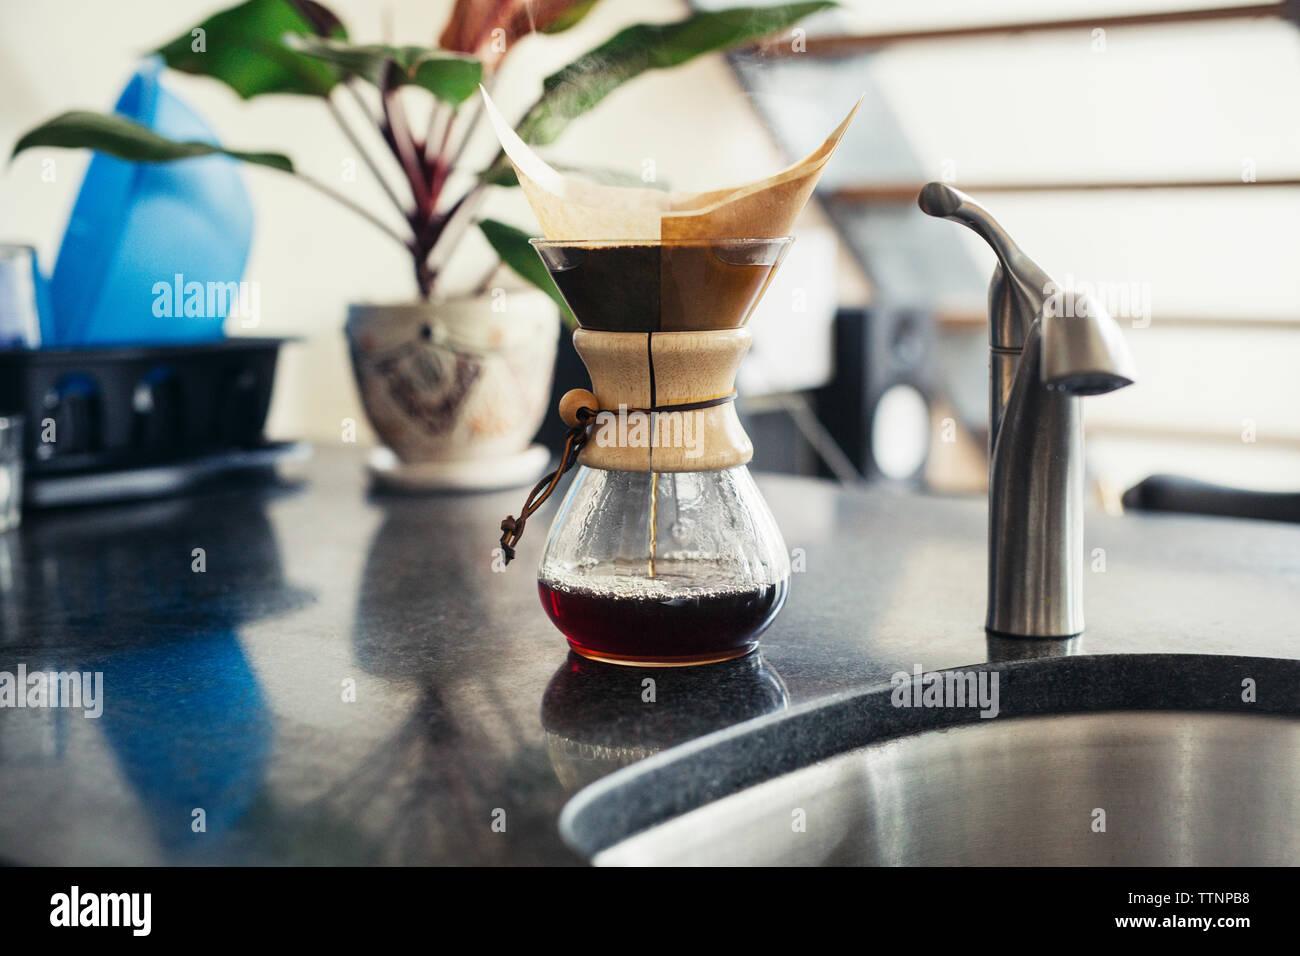 Coffee filter by faucet on kitchen counter Stock Photo